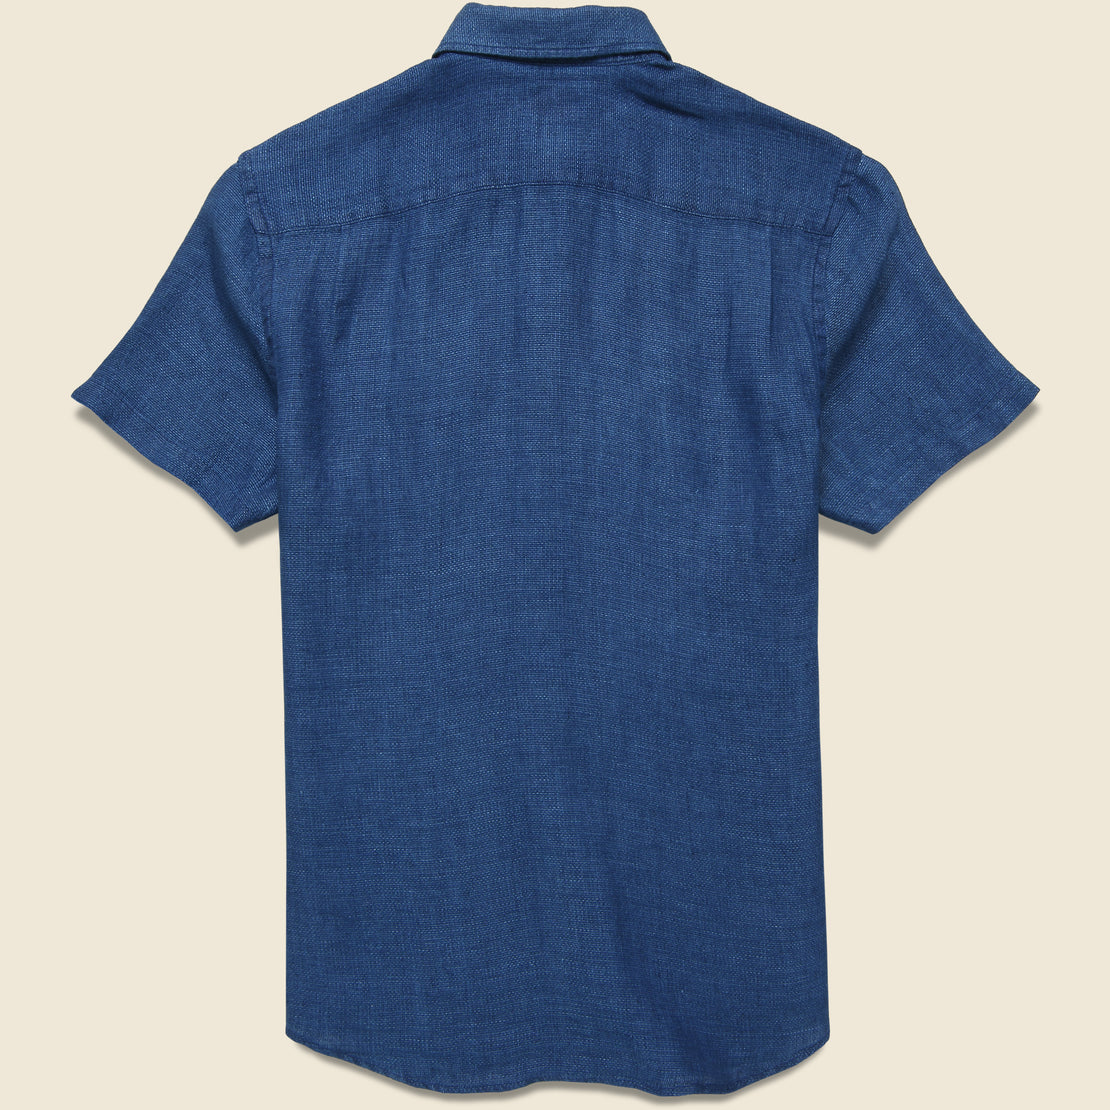 Laguna Shirt - Indigo Basketweave - Faherty - STAG Provisions - Tops - S/S Woven - Solid